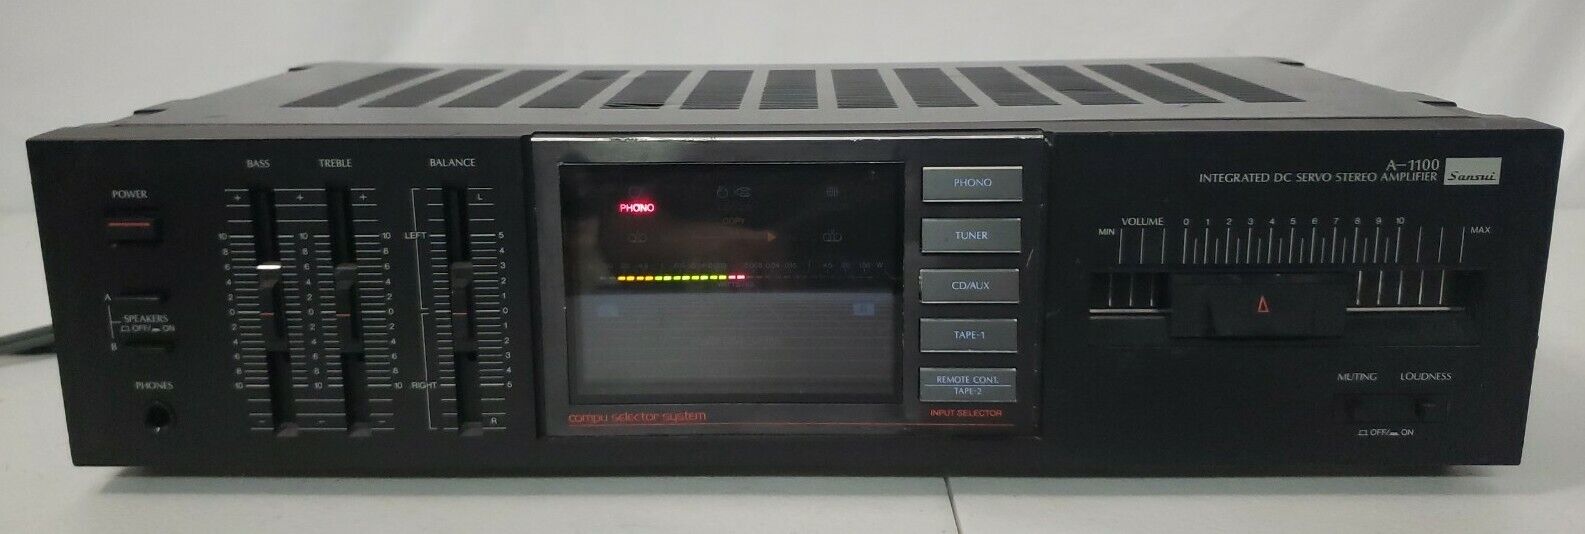 Sansui Genuine Free Shipping A-1100 Integrated DC Servo Selecto Amplifier Stereo Compu Gifts